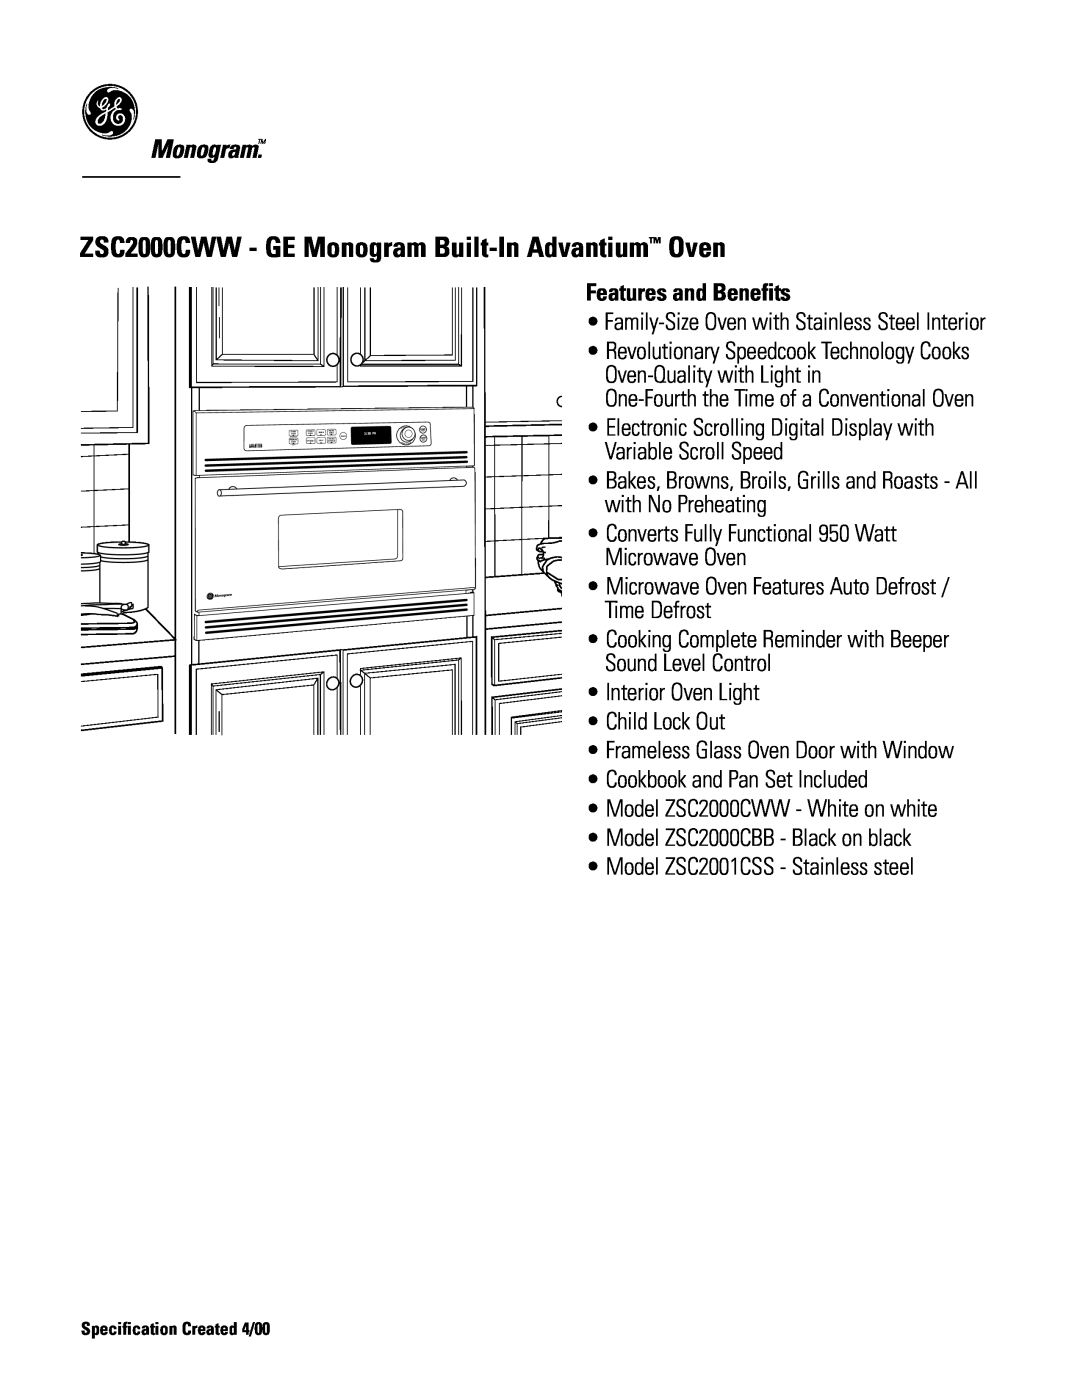 GE Monogram dimensions ZSC2000CWW - GE Monogram Built-In Advantium Oven, Features and Benefits 